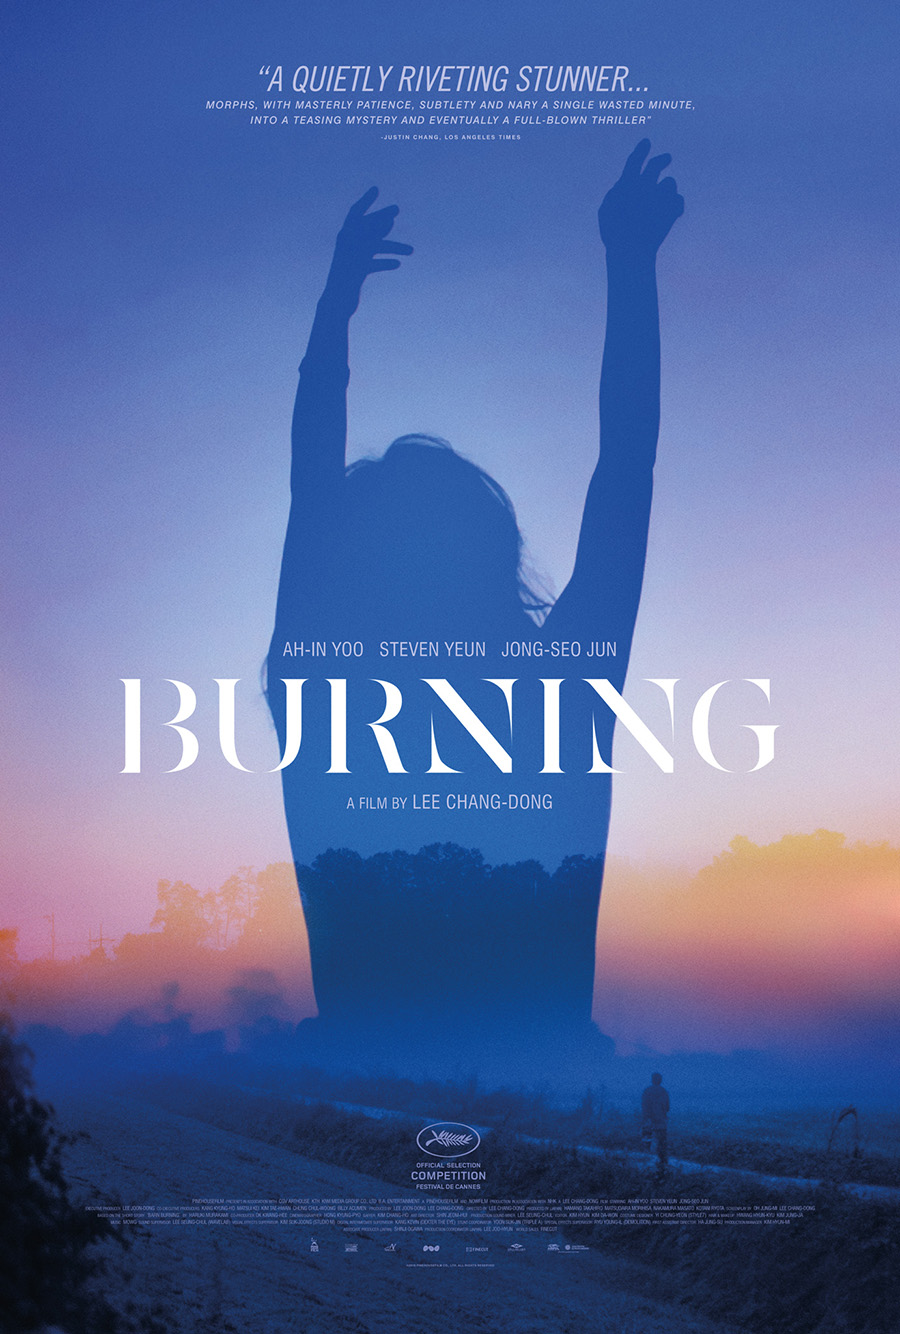 theatrical poster for Burning